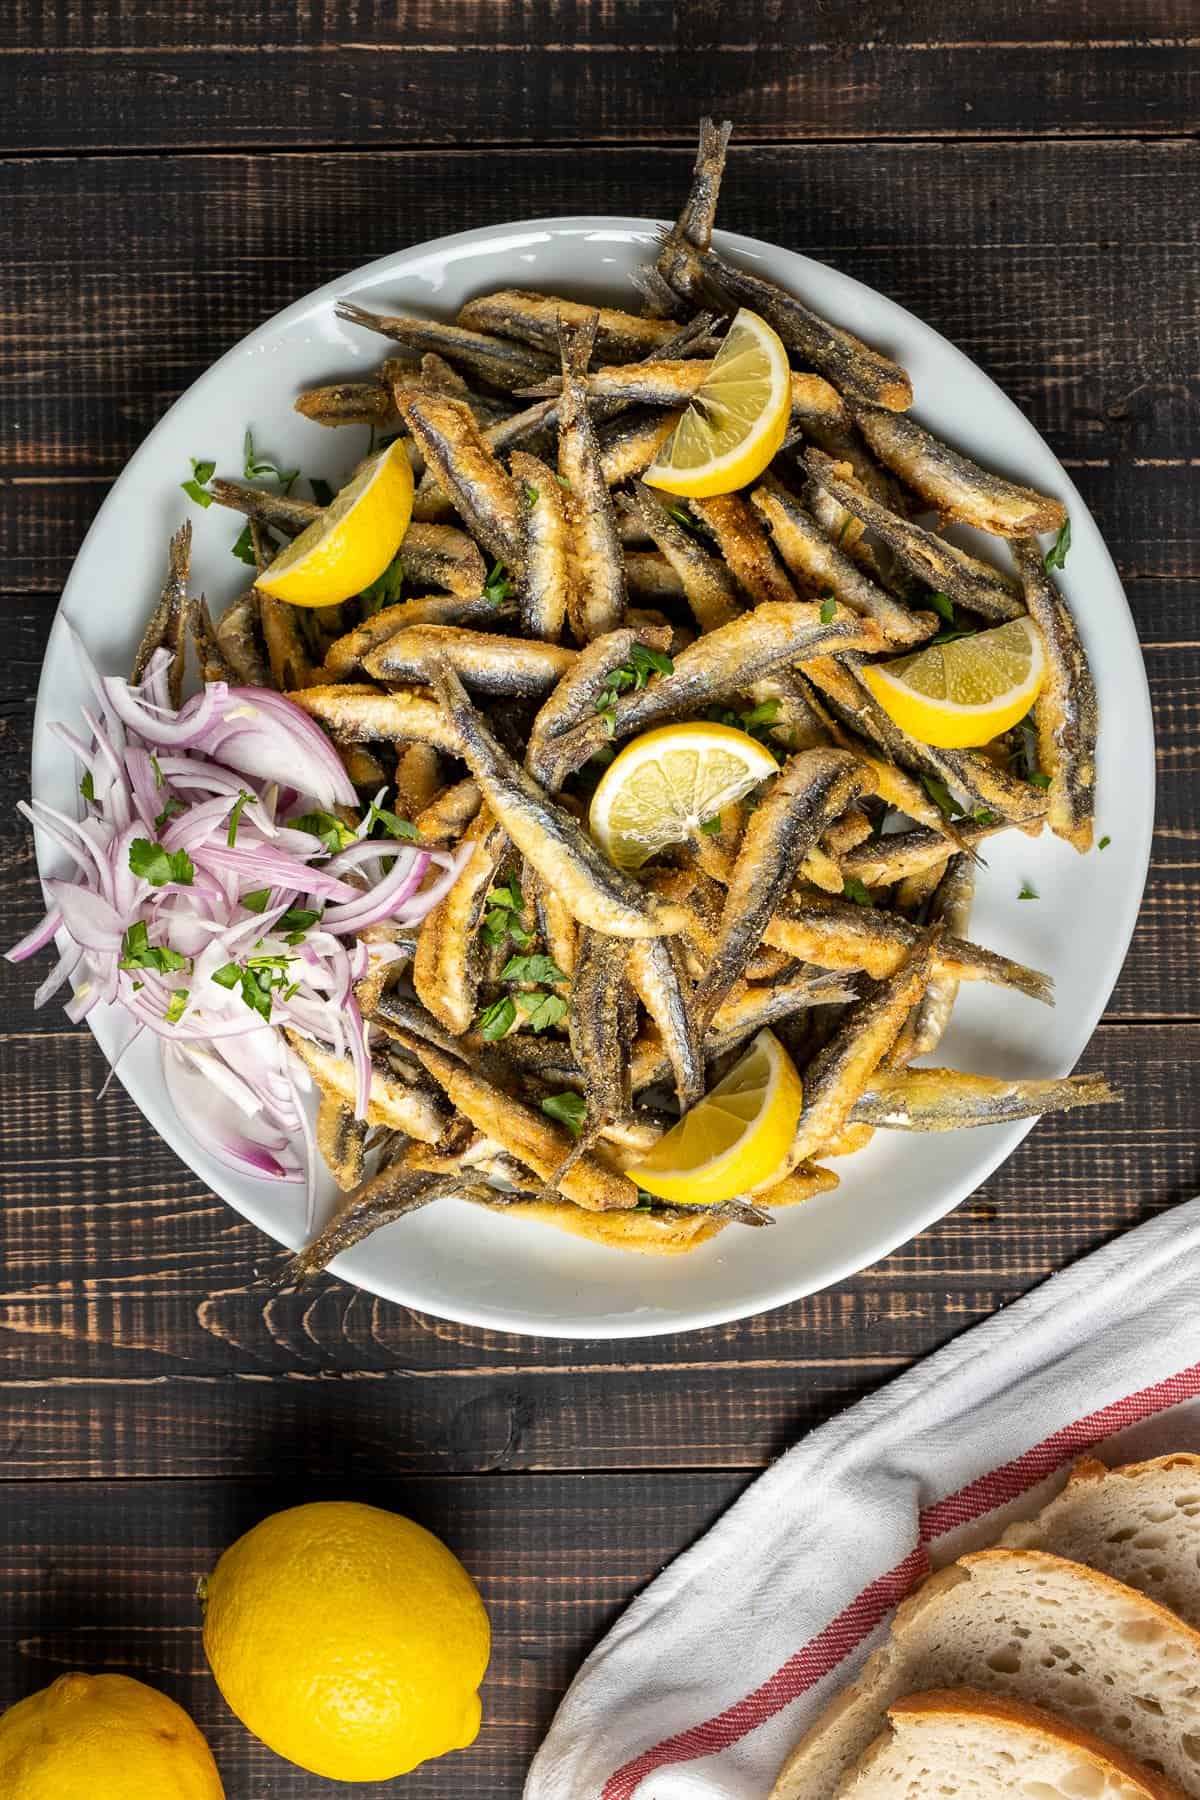 Fried anchovies with lemon wedges and onion slices on a plate and bread slices on the side.